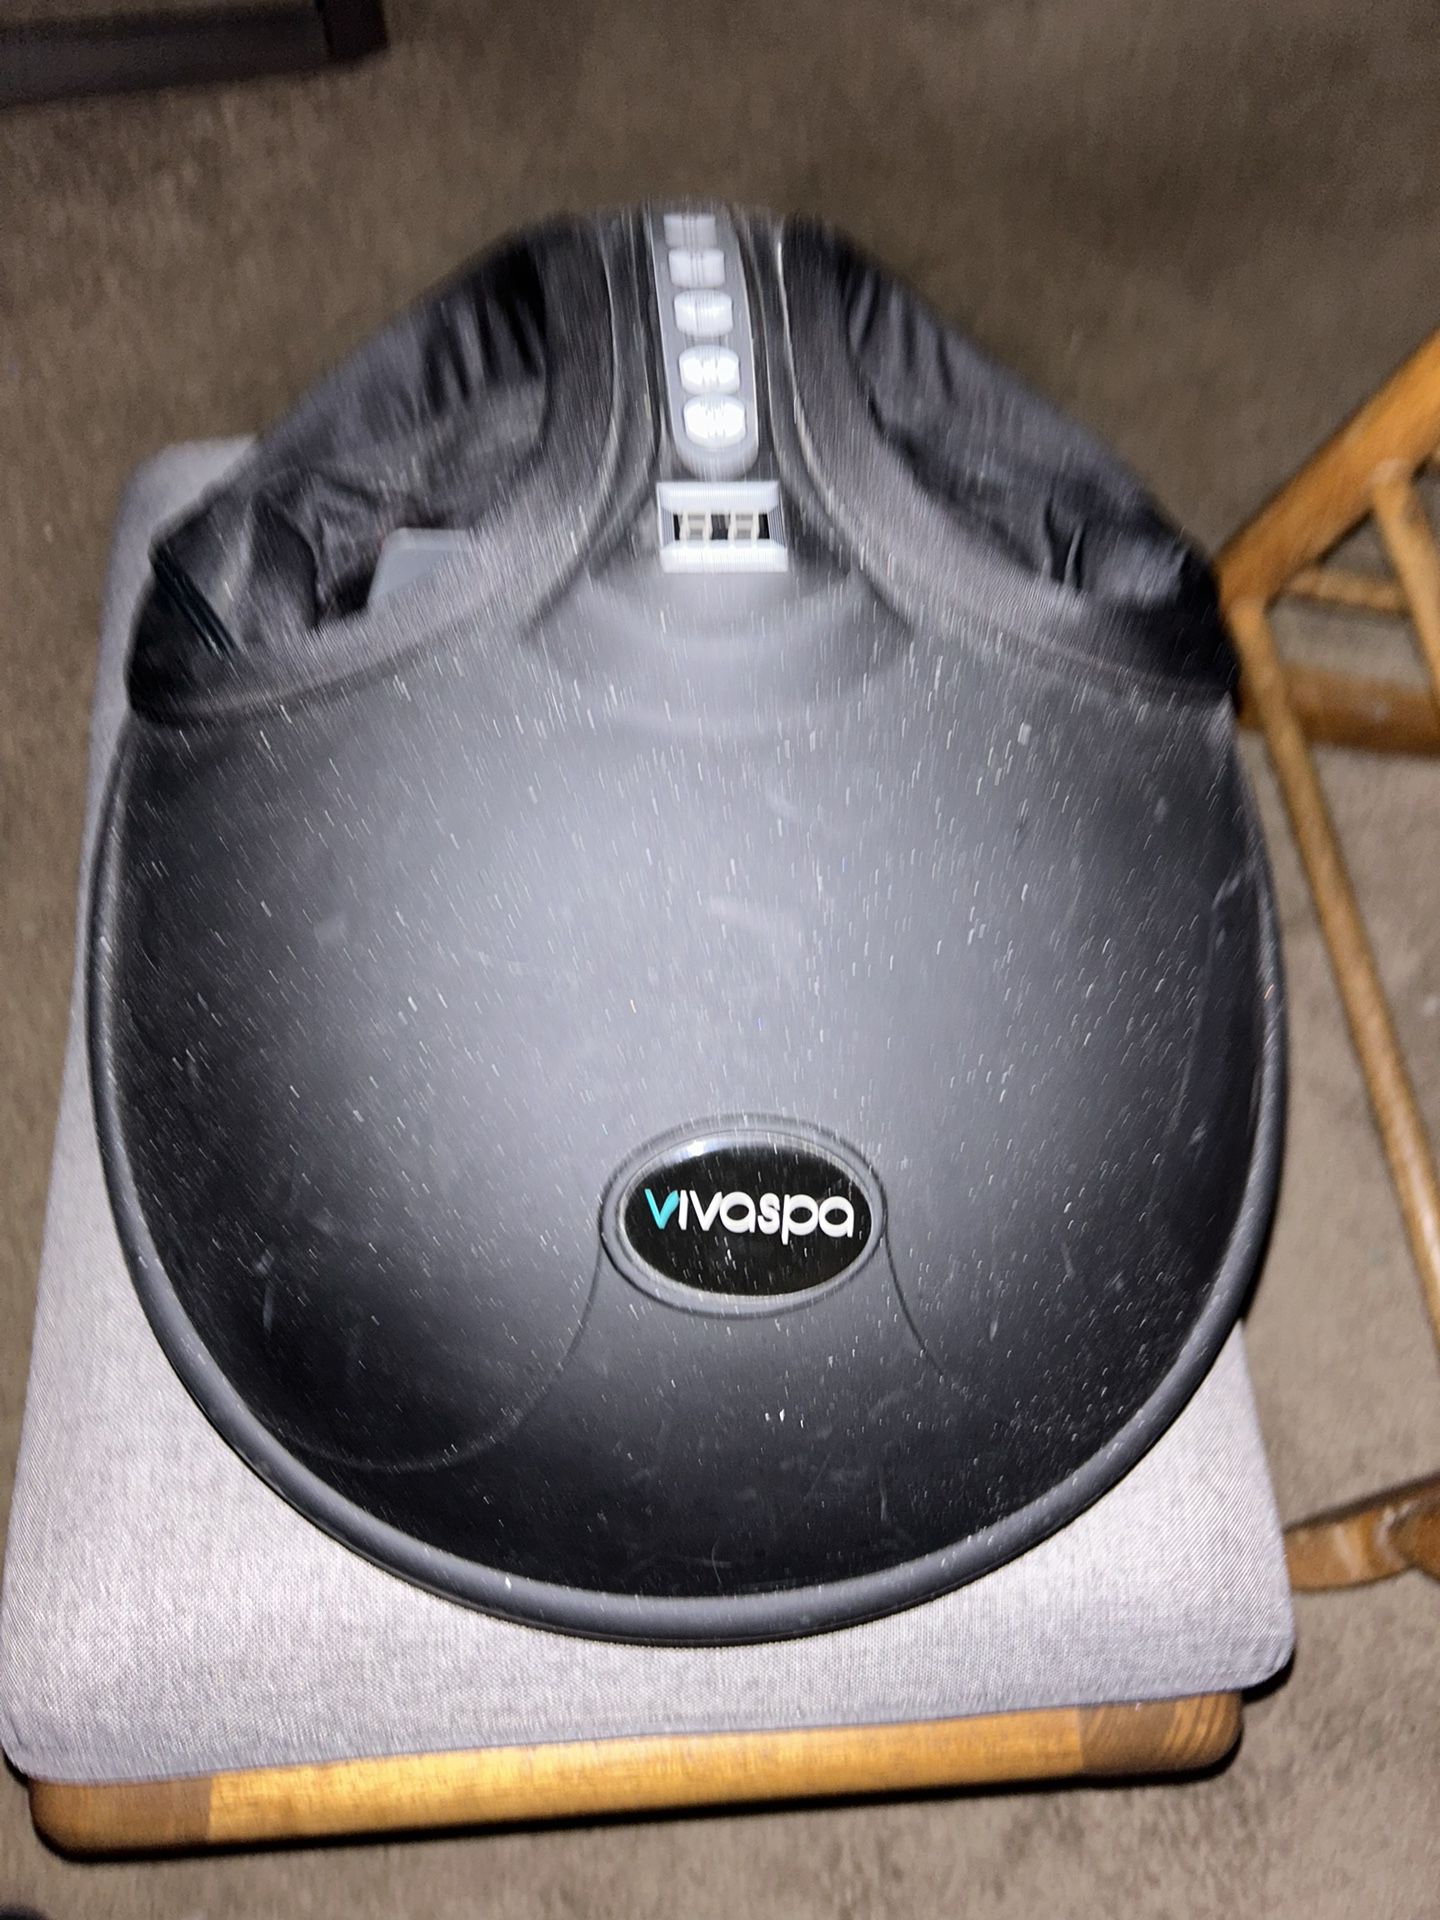 Viva Spa Foot Massager With Vibration And Heat And Remote